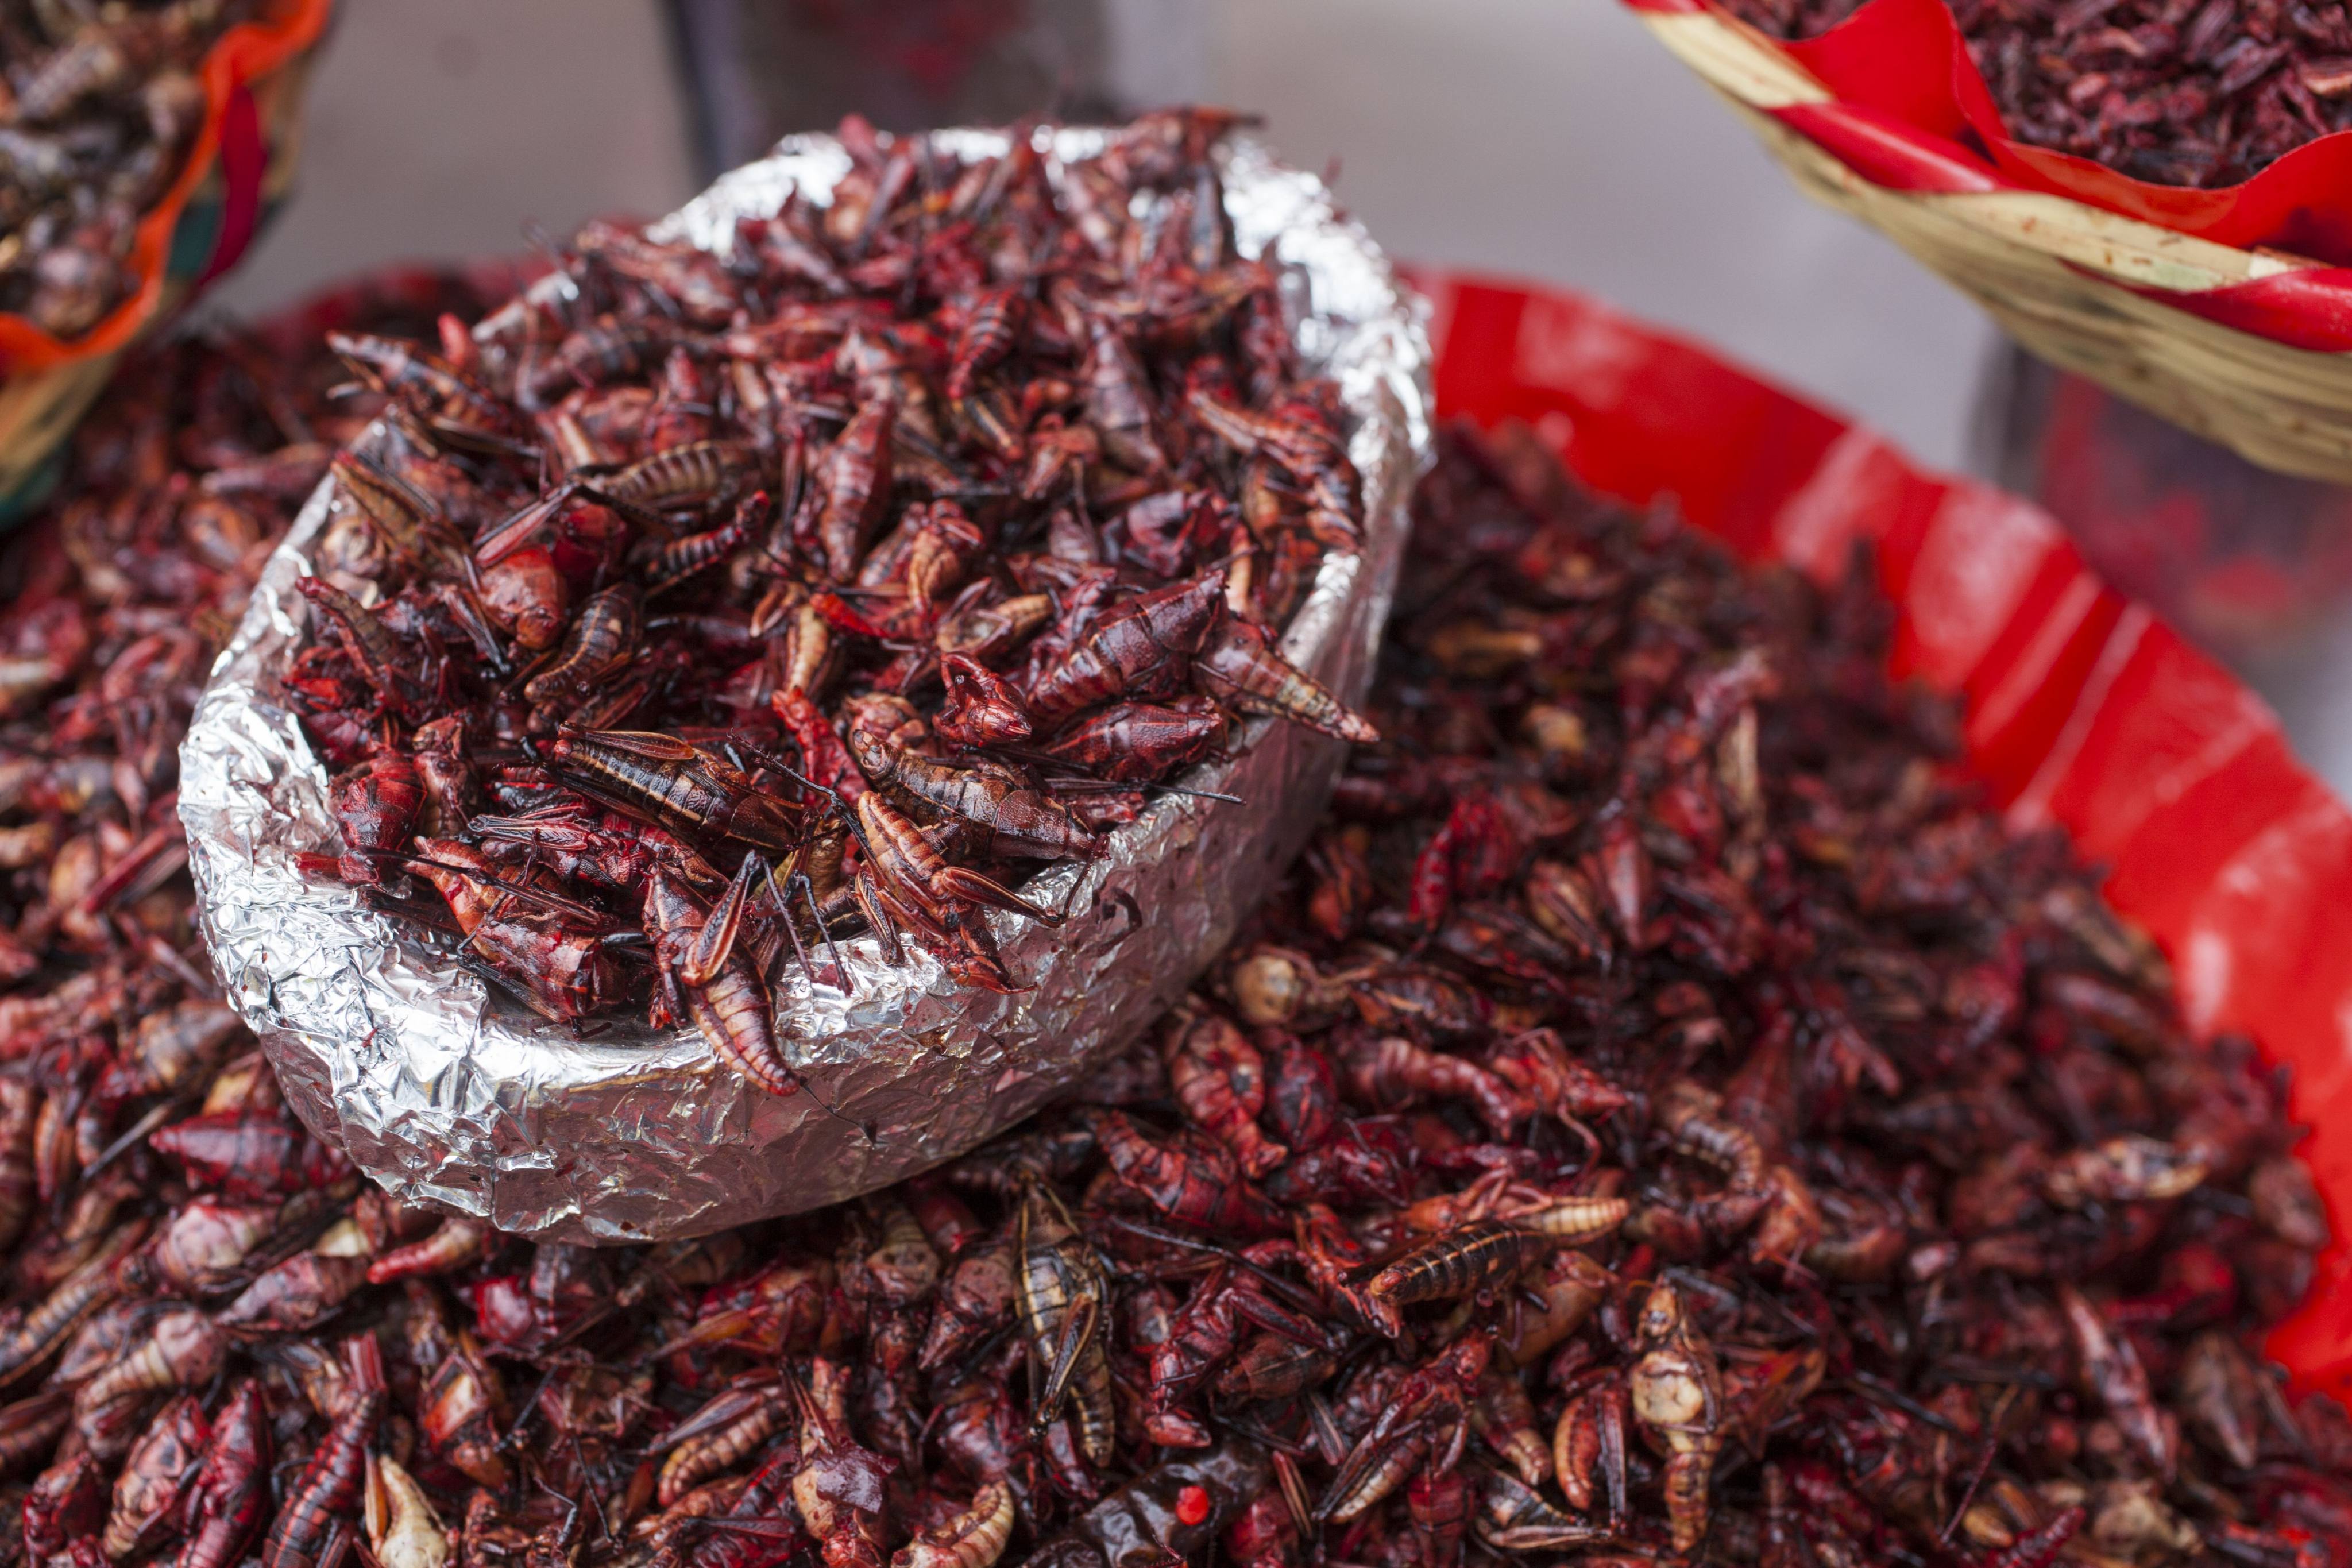 Chapulines, or grasshoppers, at a market in Mexico. Photo: Getty Images